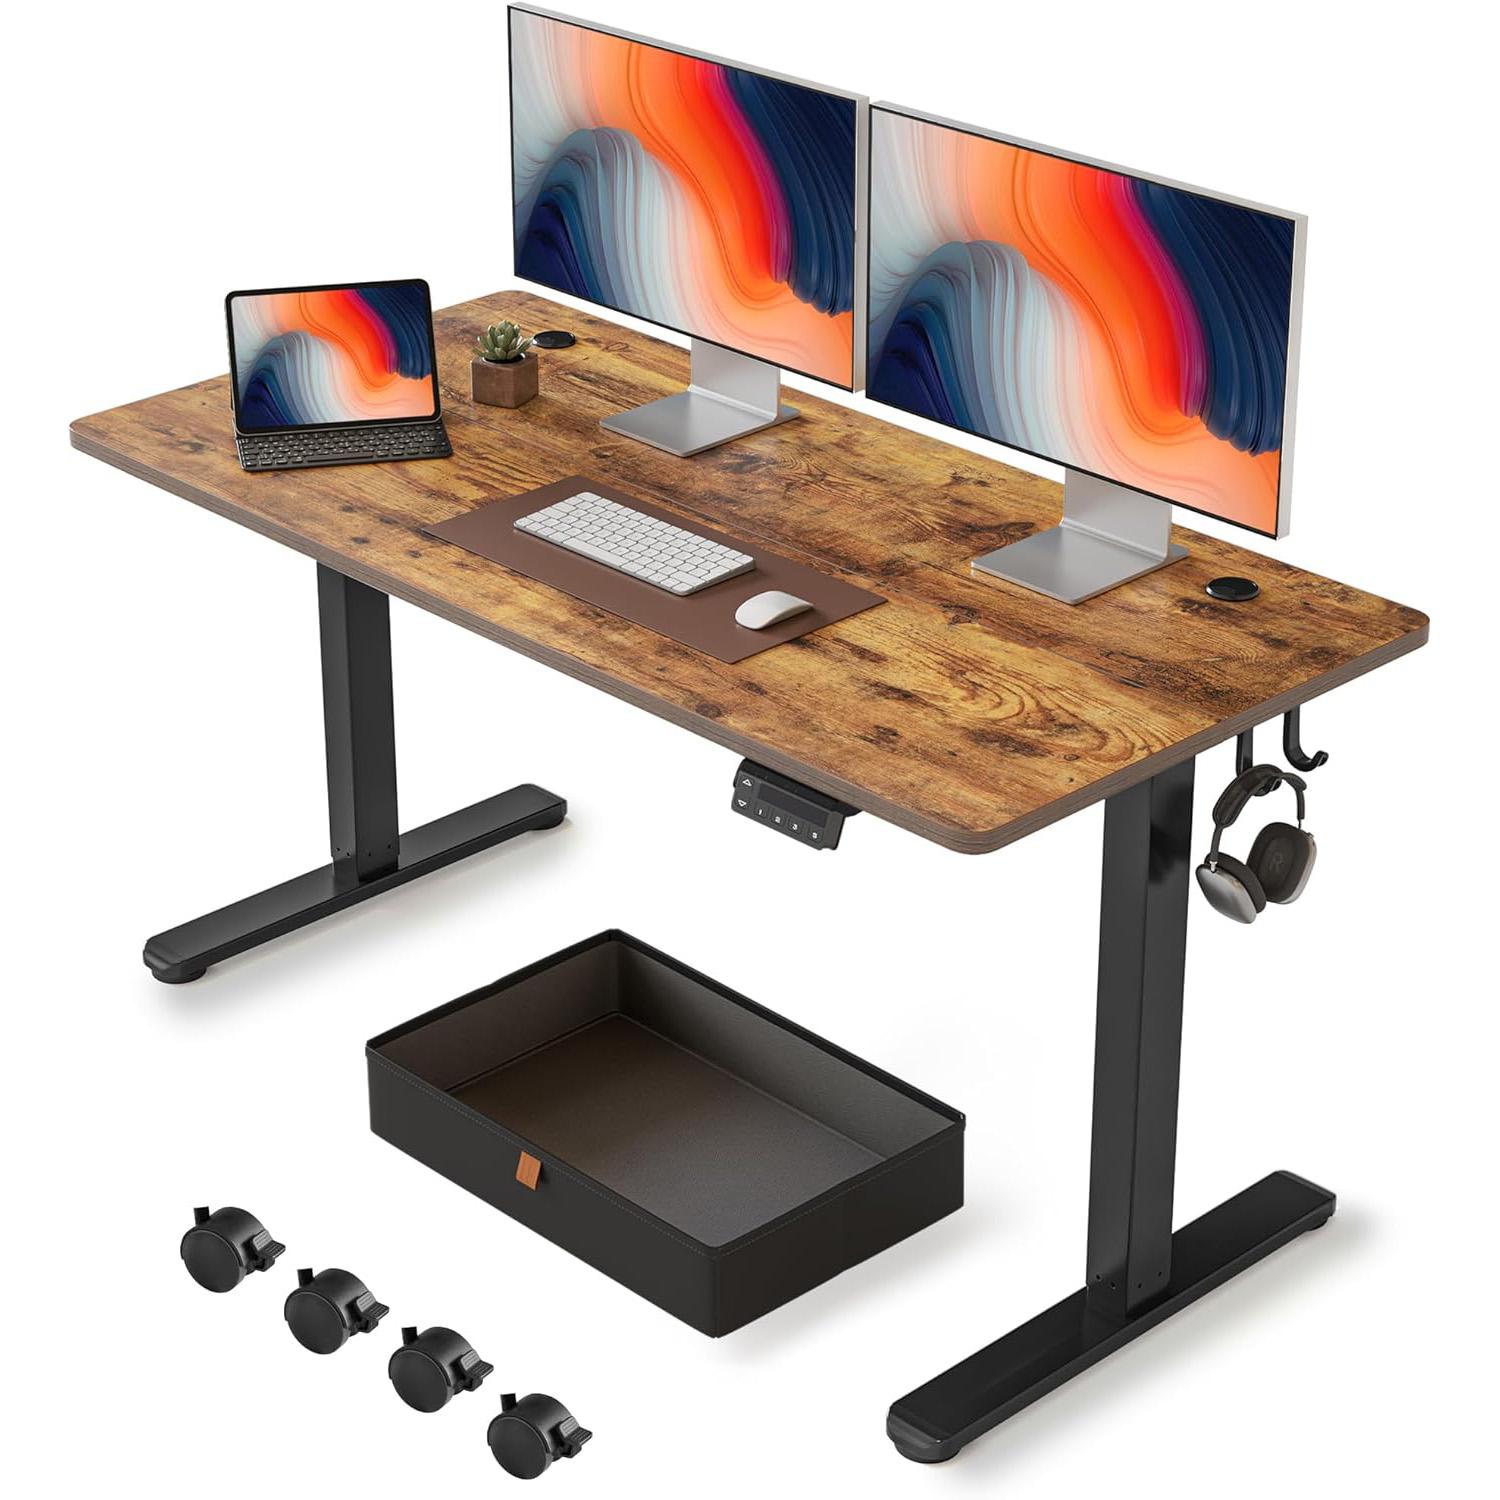 Fezibo 55 x 24 Inches Standing Desk with Drawer for $119.99 Shipped